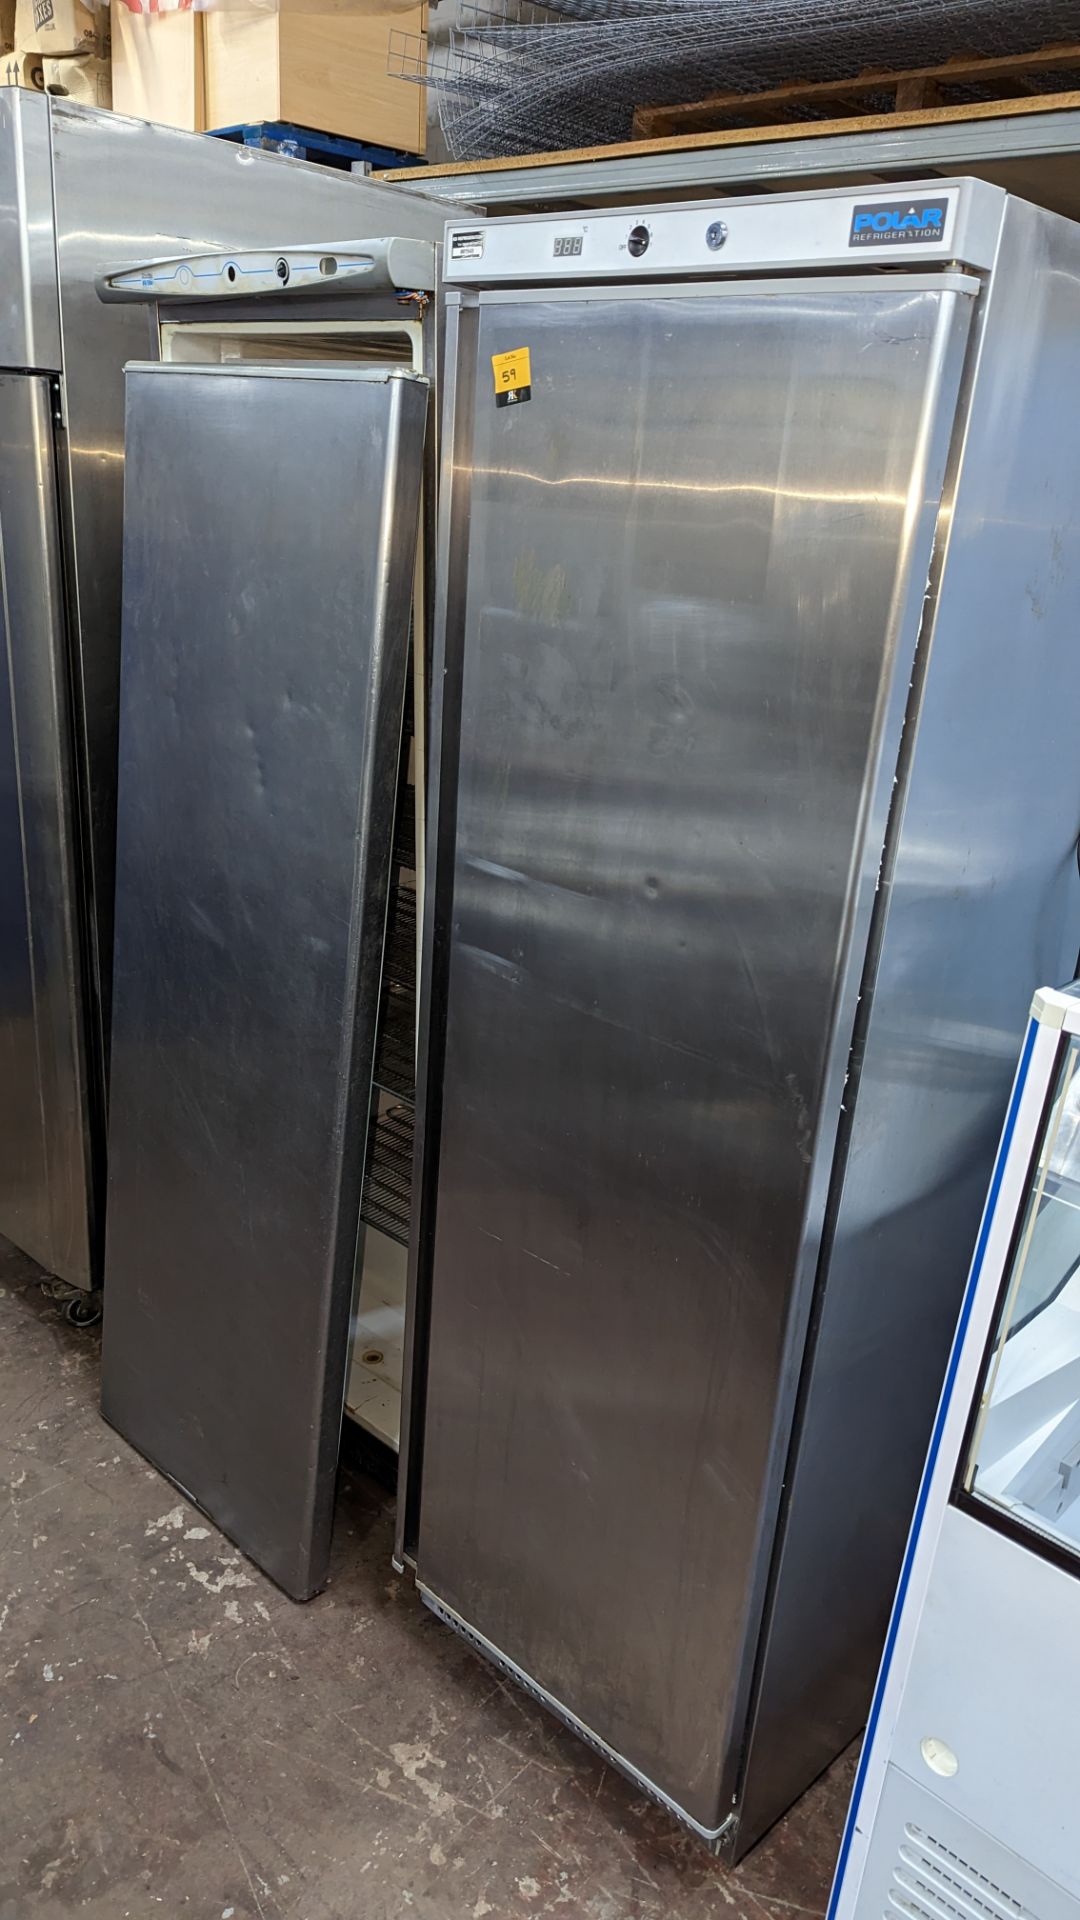 2 off tall stainless steel freezers. NB one freezer is damaged